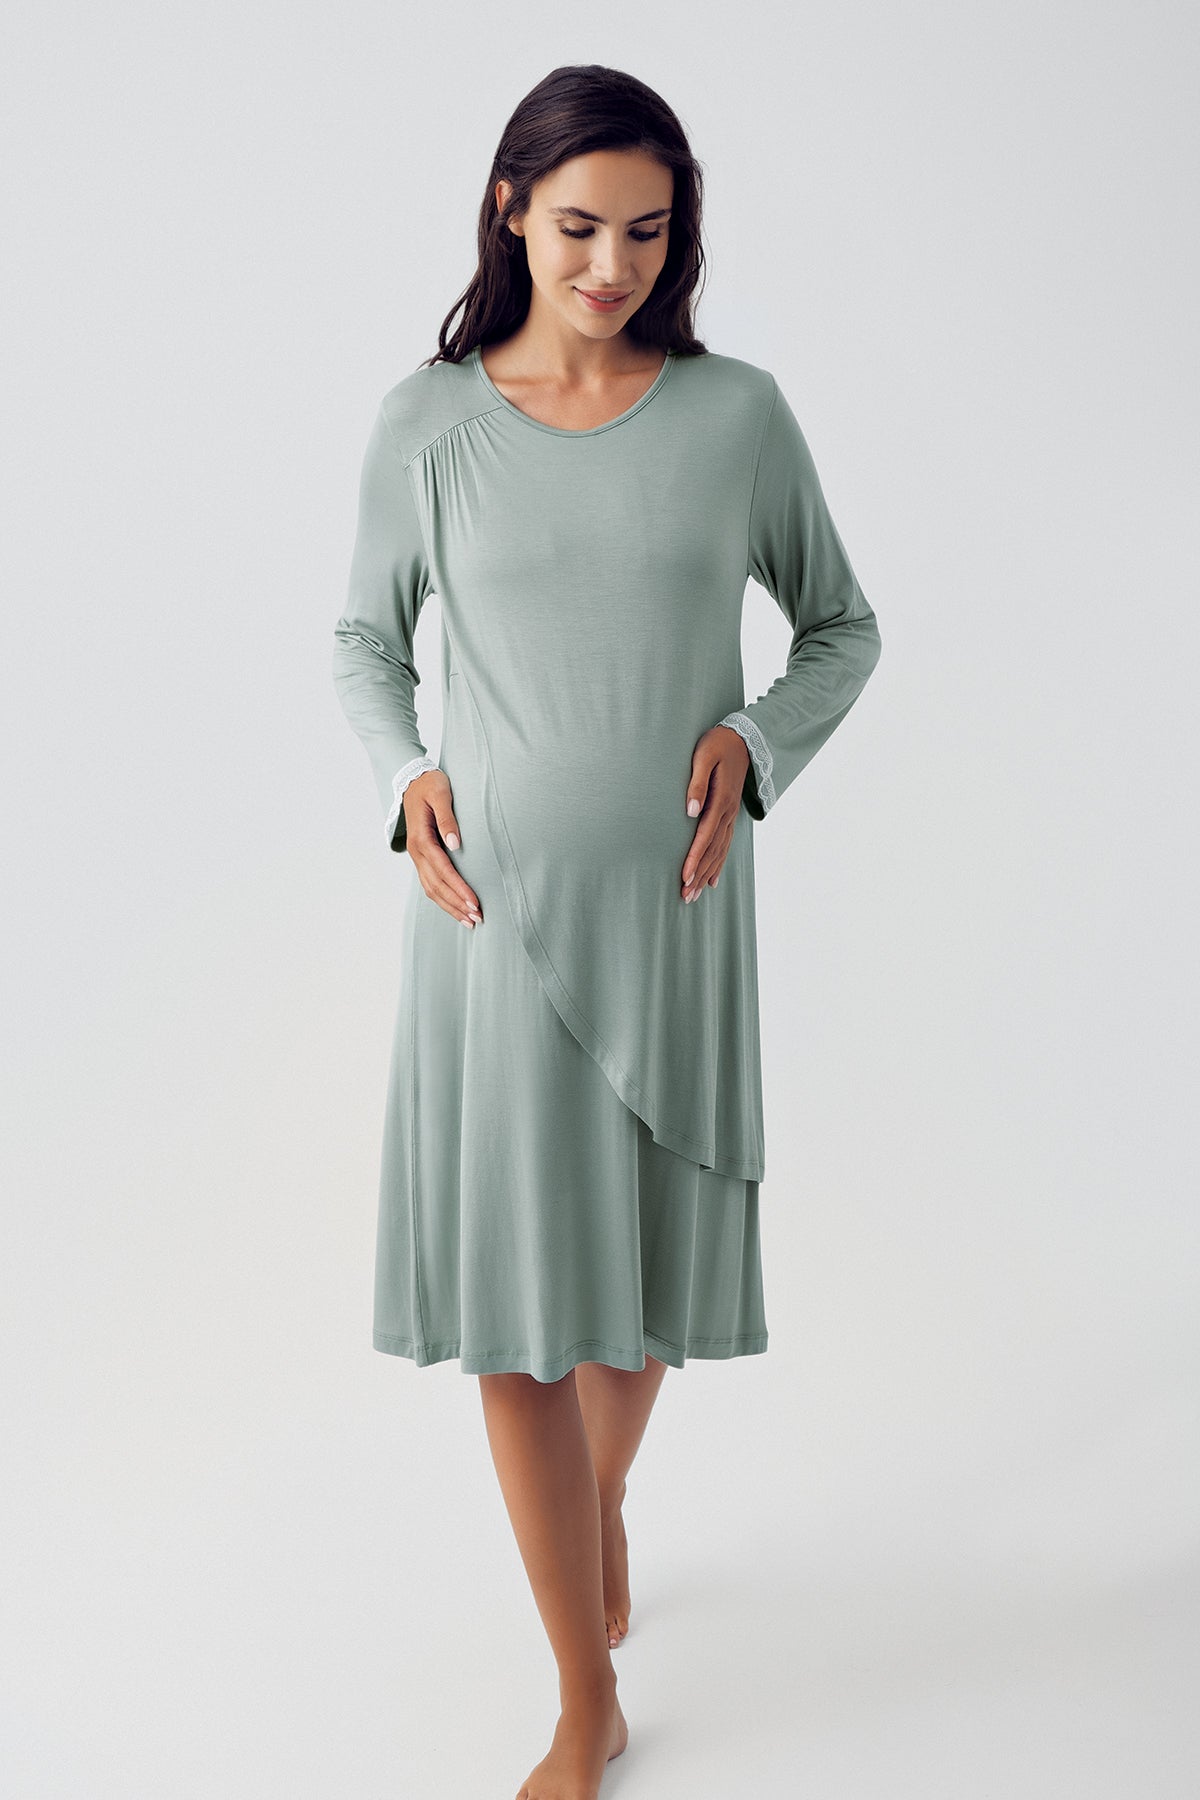 Shopymommy 15109 Wide Double Breasted Maternity & Nursing Nightgown Green